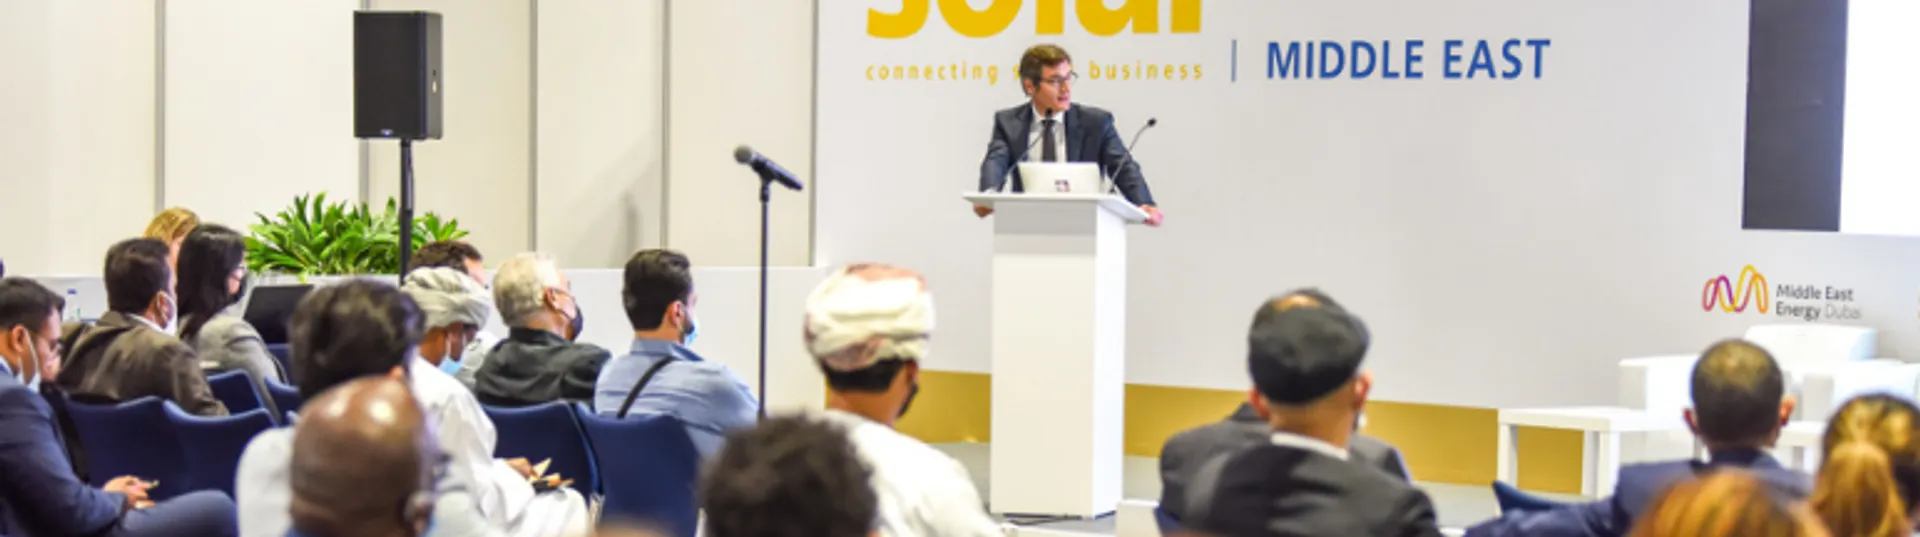 INTERSOLAR MIDDLE EAST2-5x1yvy.png